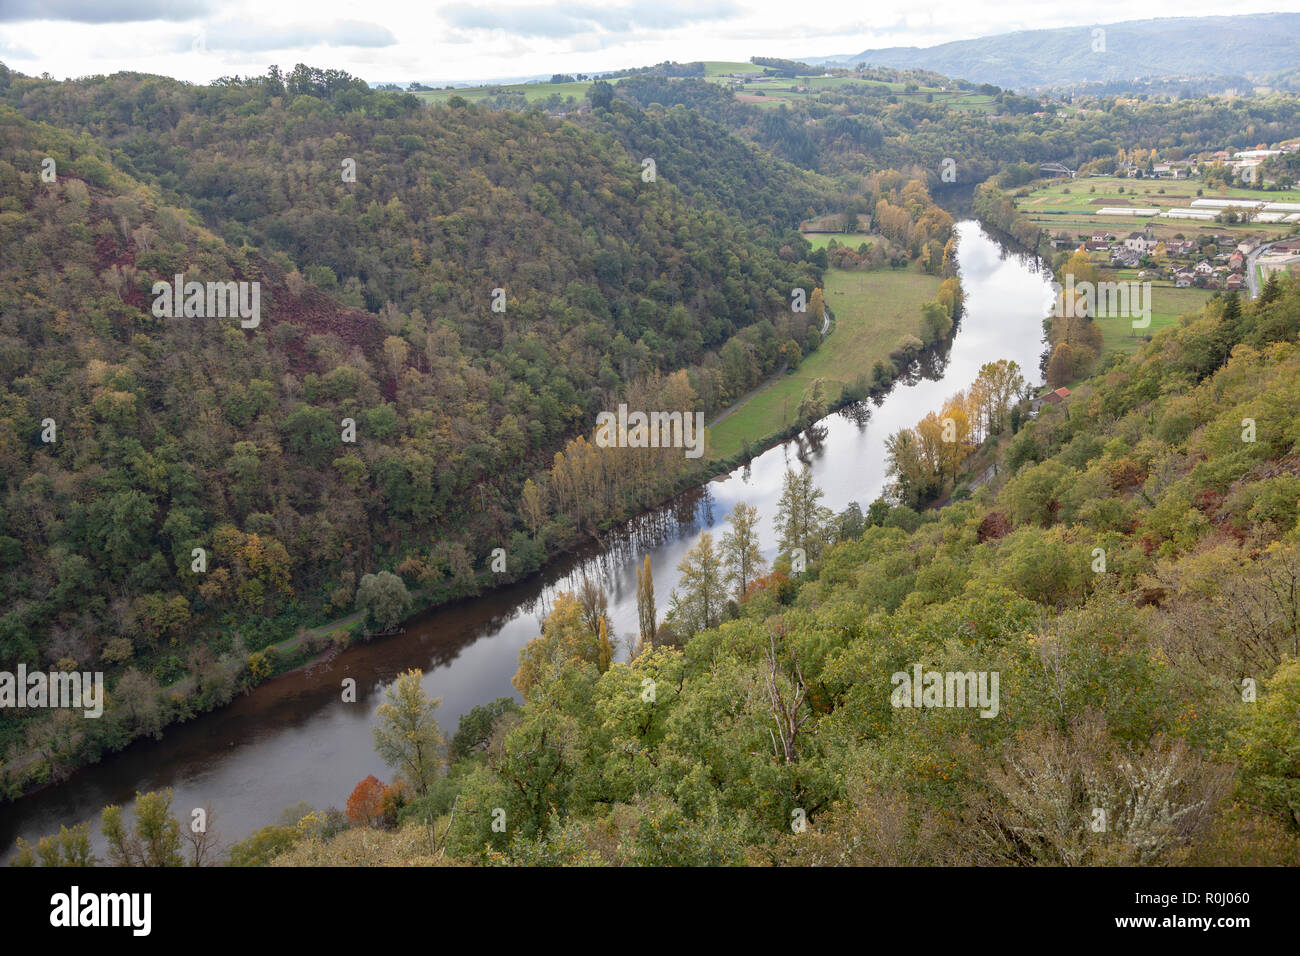 The valley of the Lot river, in Autumn (France). Near the 'Port d'Agrès', the Lot -  tributary of the Garonne river - flows peacefully towards west. Stock Photo